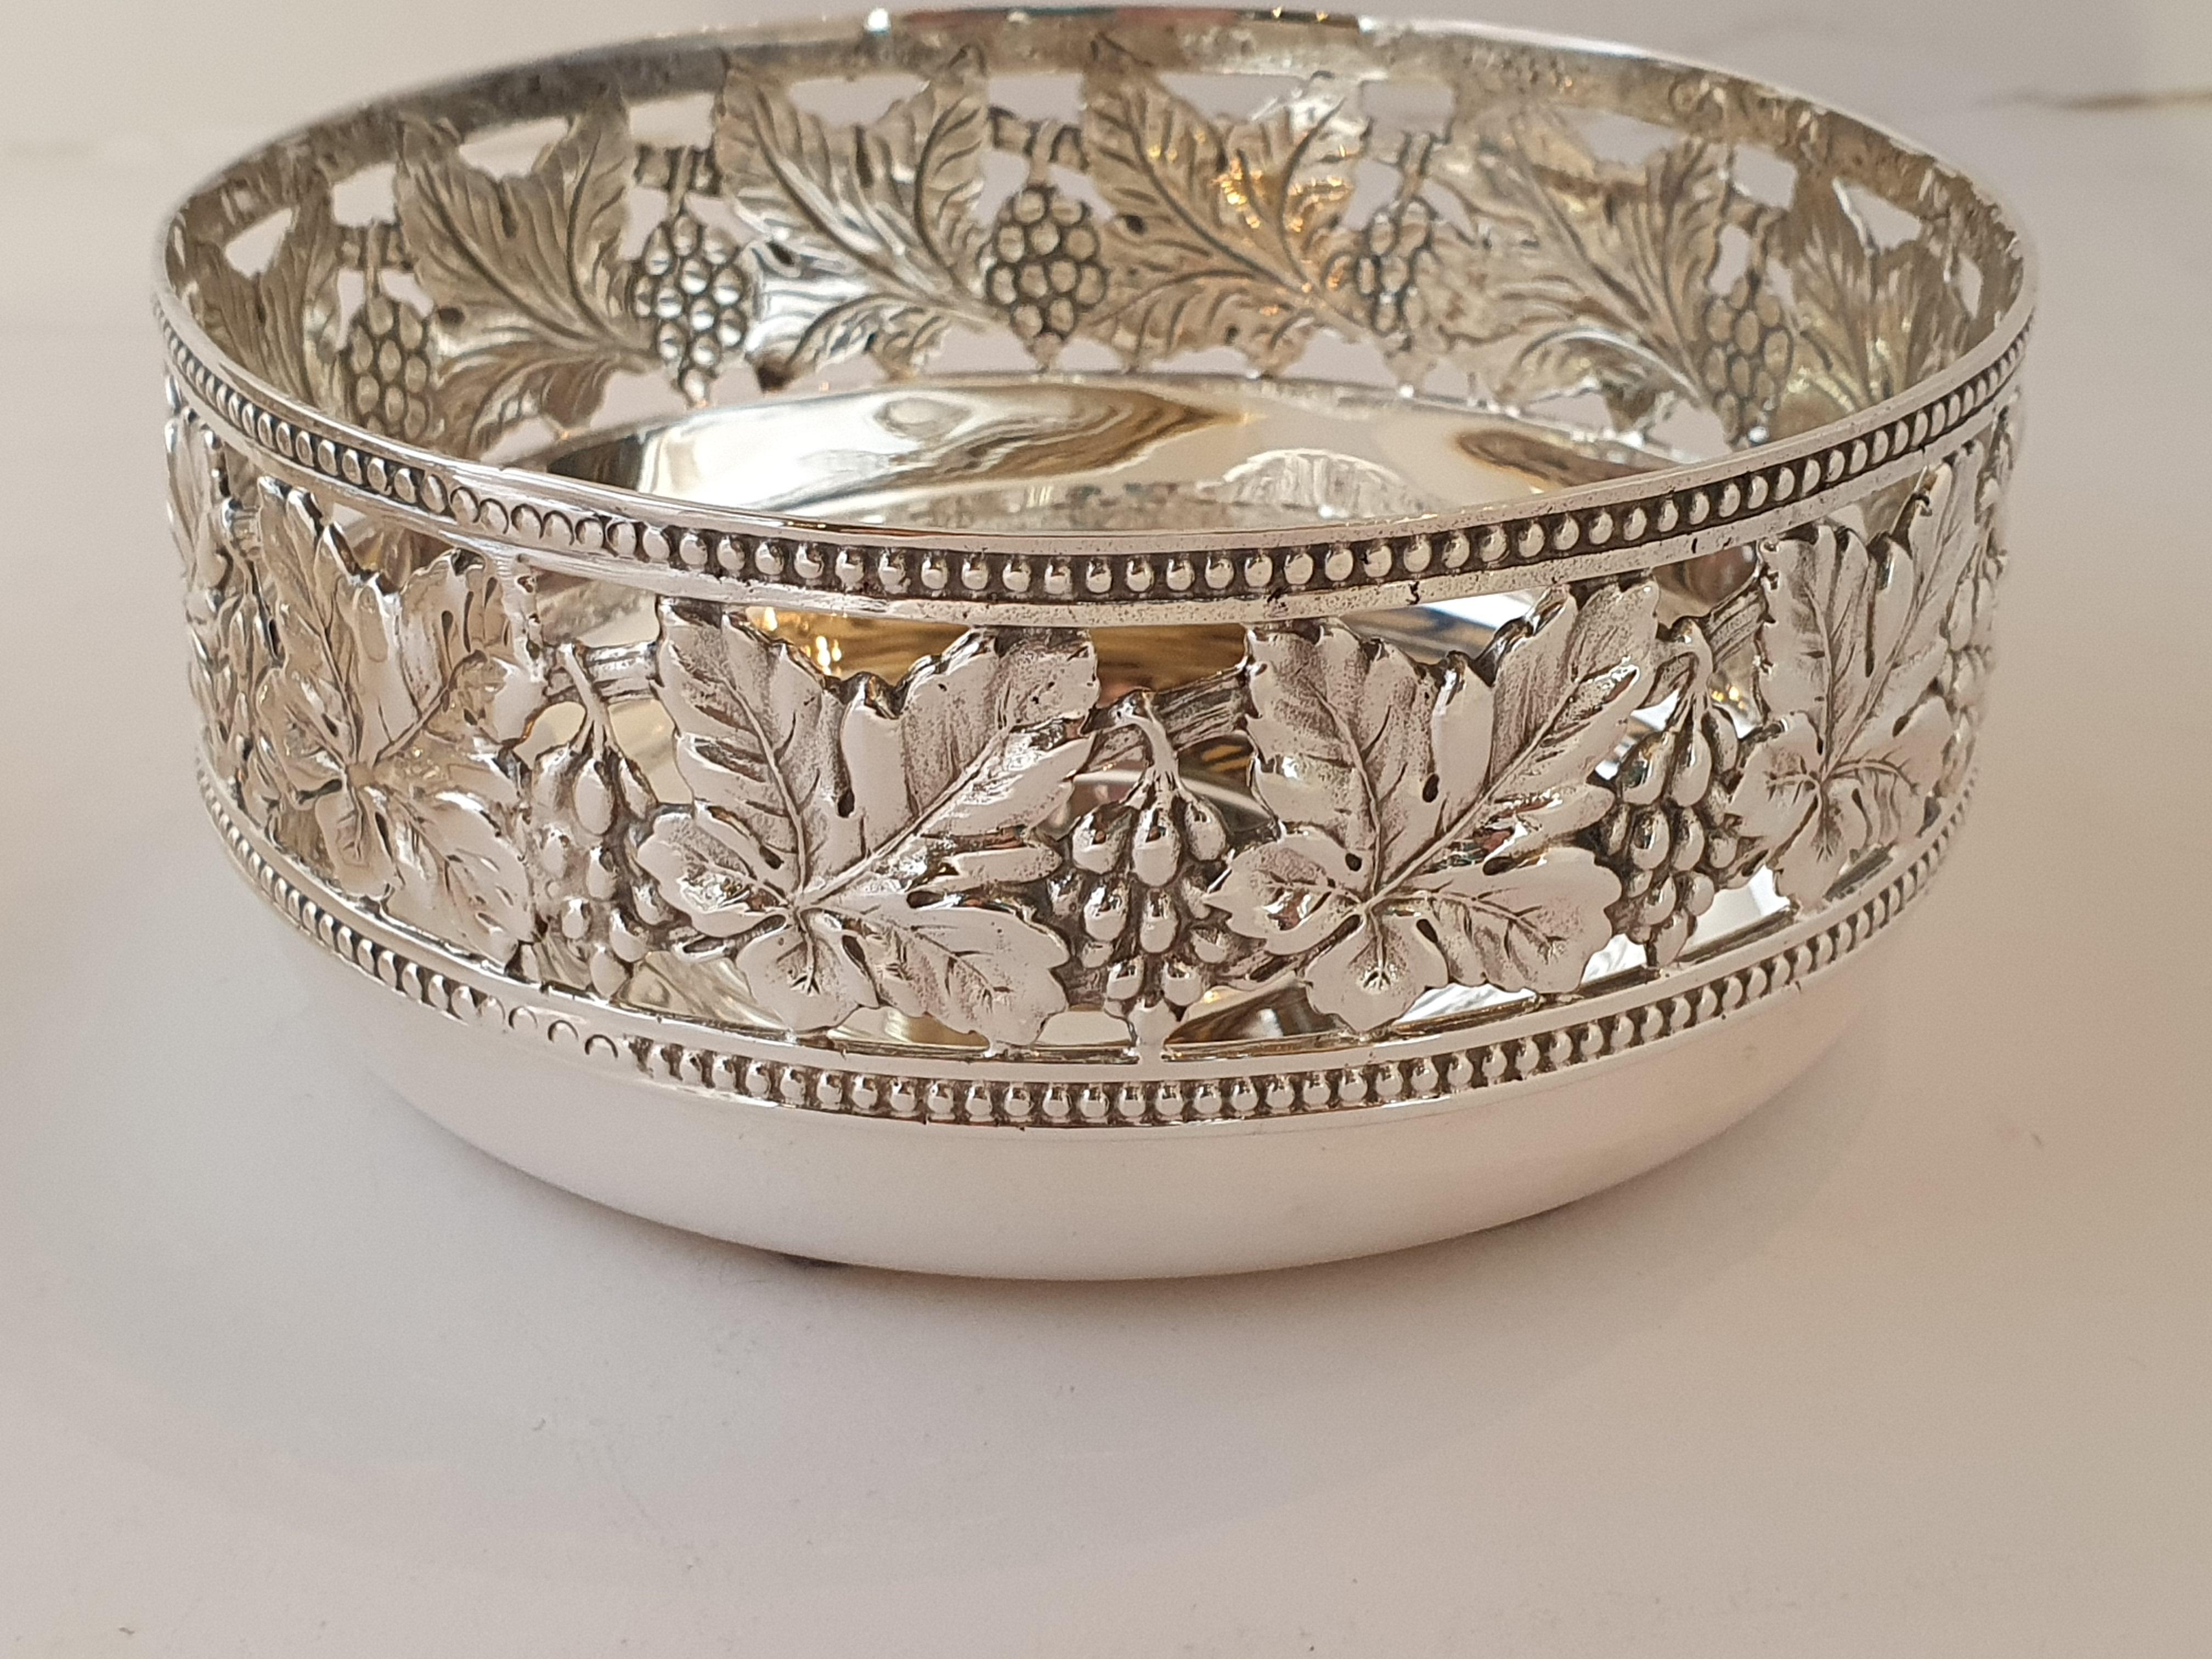 This gorgeus couple of wine coaster handmade with grapes and leaves motif.
It was made by Messulam Argenti drawing inspiration from English Regency silver.
Messulam, founded in Milan in 1882, was until its closure in 2019 one of the greatest